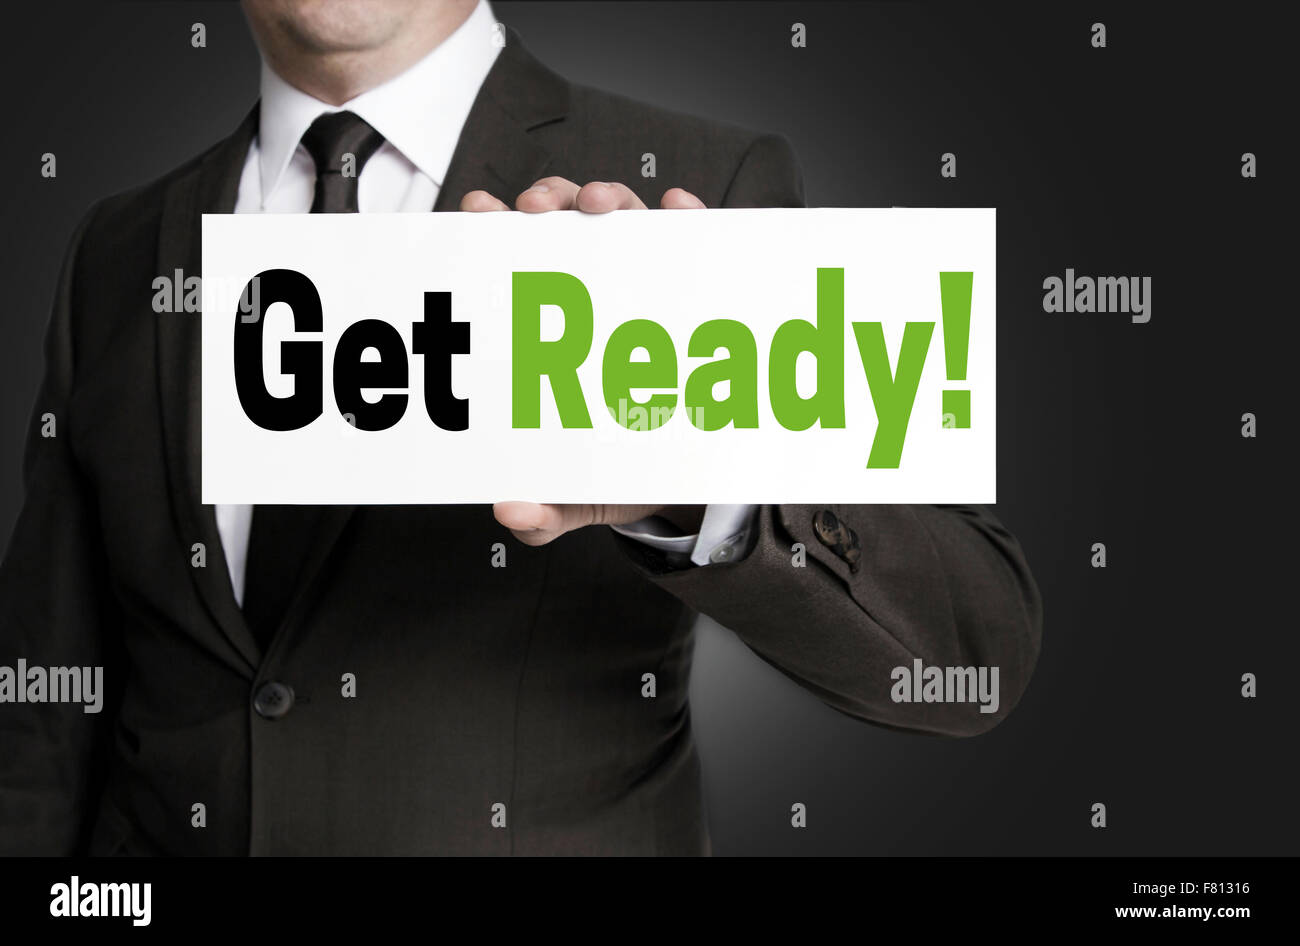 Get ready sign is held by businessman concept. Stock Photo